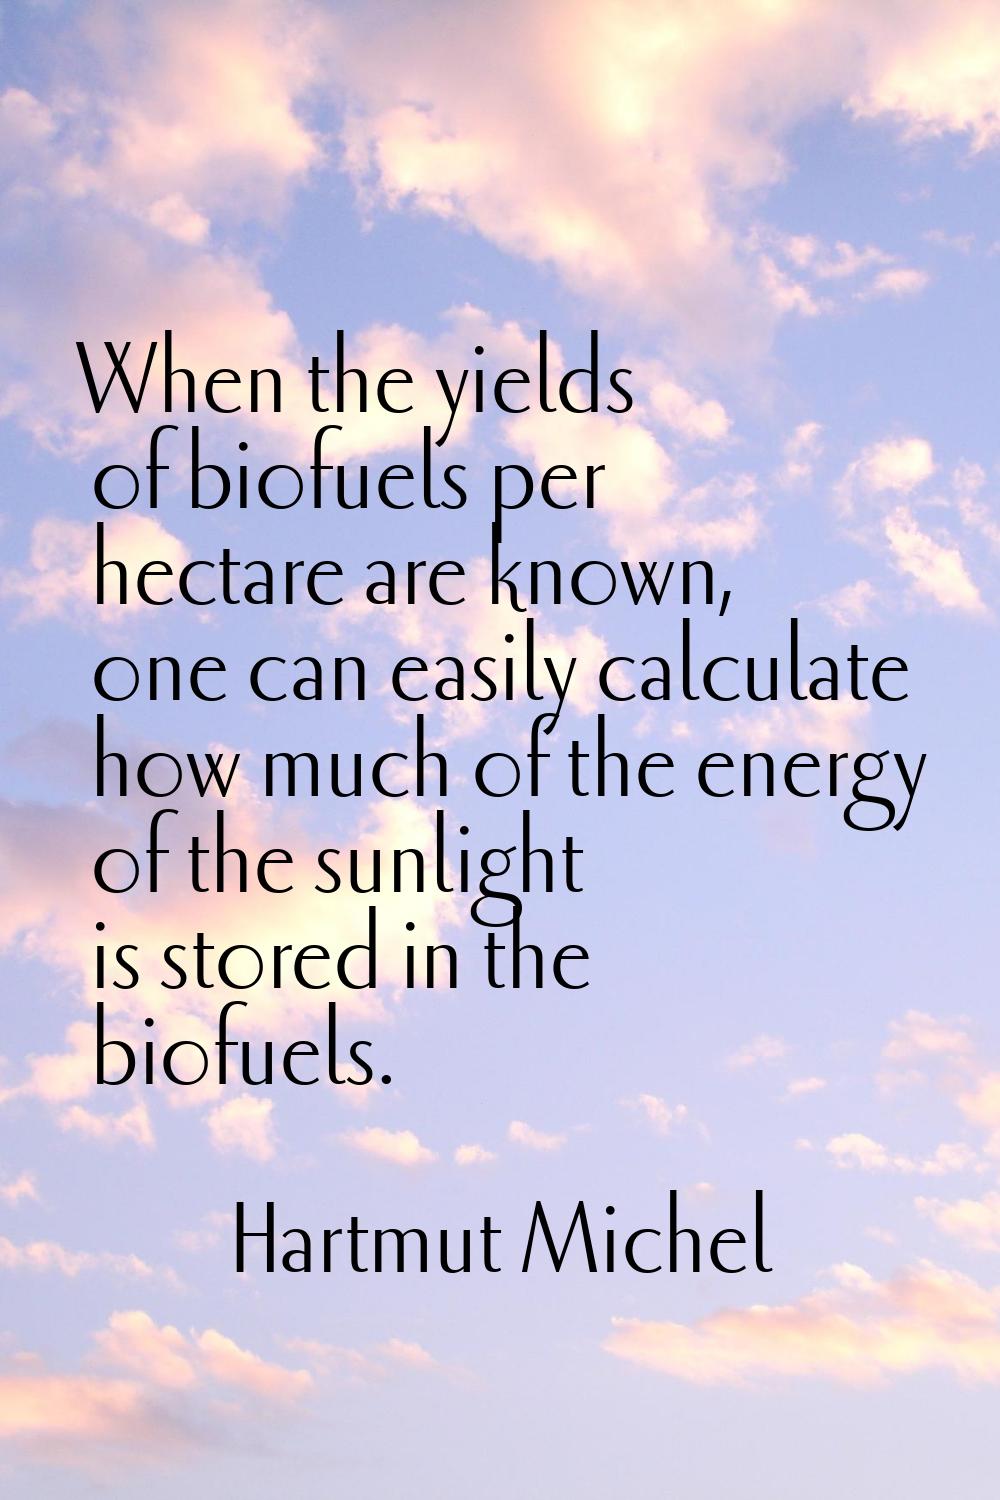 When the yields of biofuels per hectare are known, one can easily calculate how much of the energy 